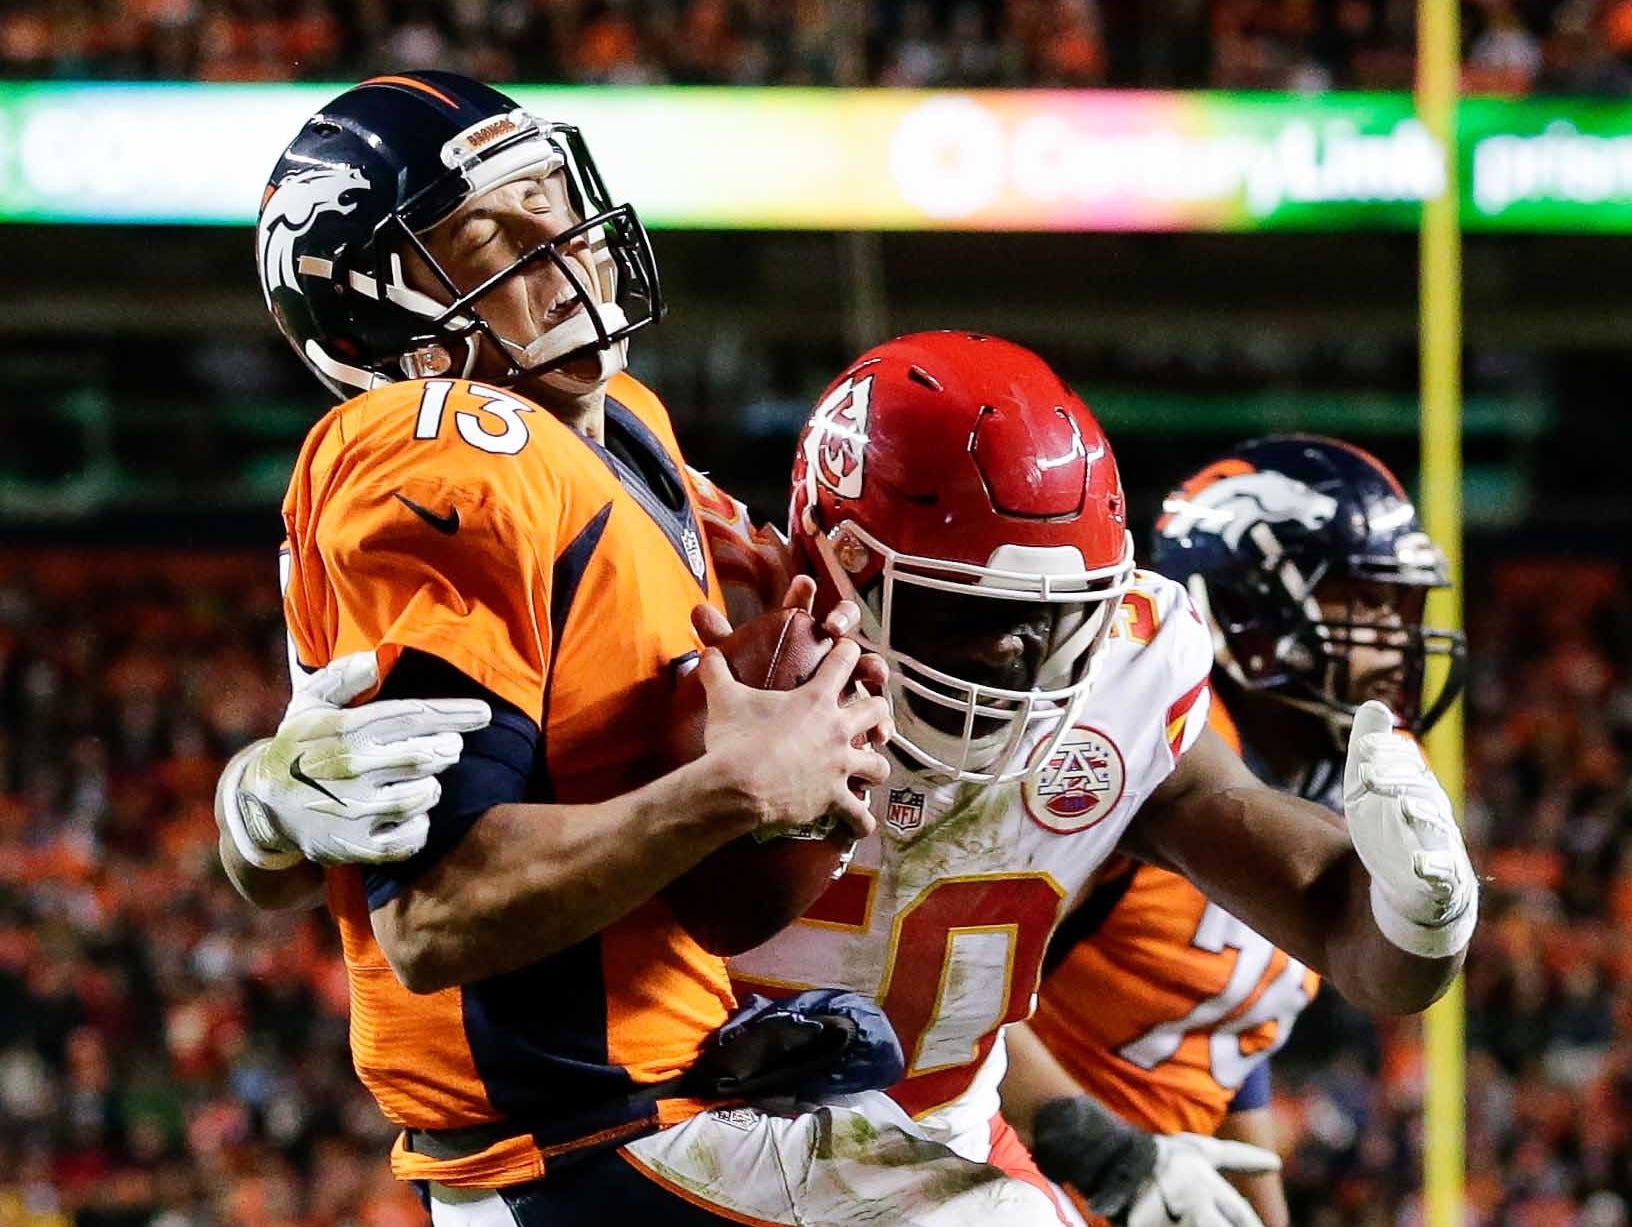 Denver Broncos quarterback Trevor Siemian (13) is sacked by Kansas City Chiefs outside linebacker Justin Houston (50) in the second quarter at Sports Authority Field at Mile High.